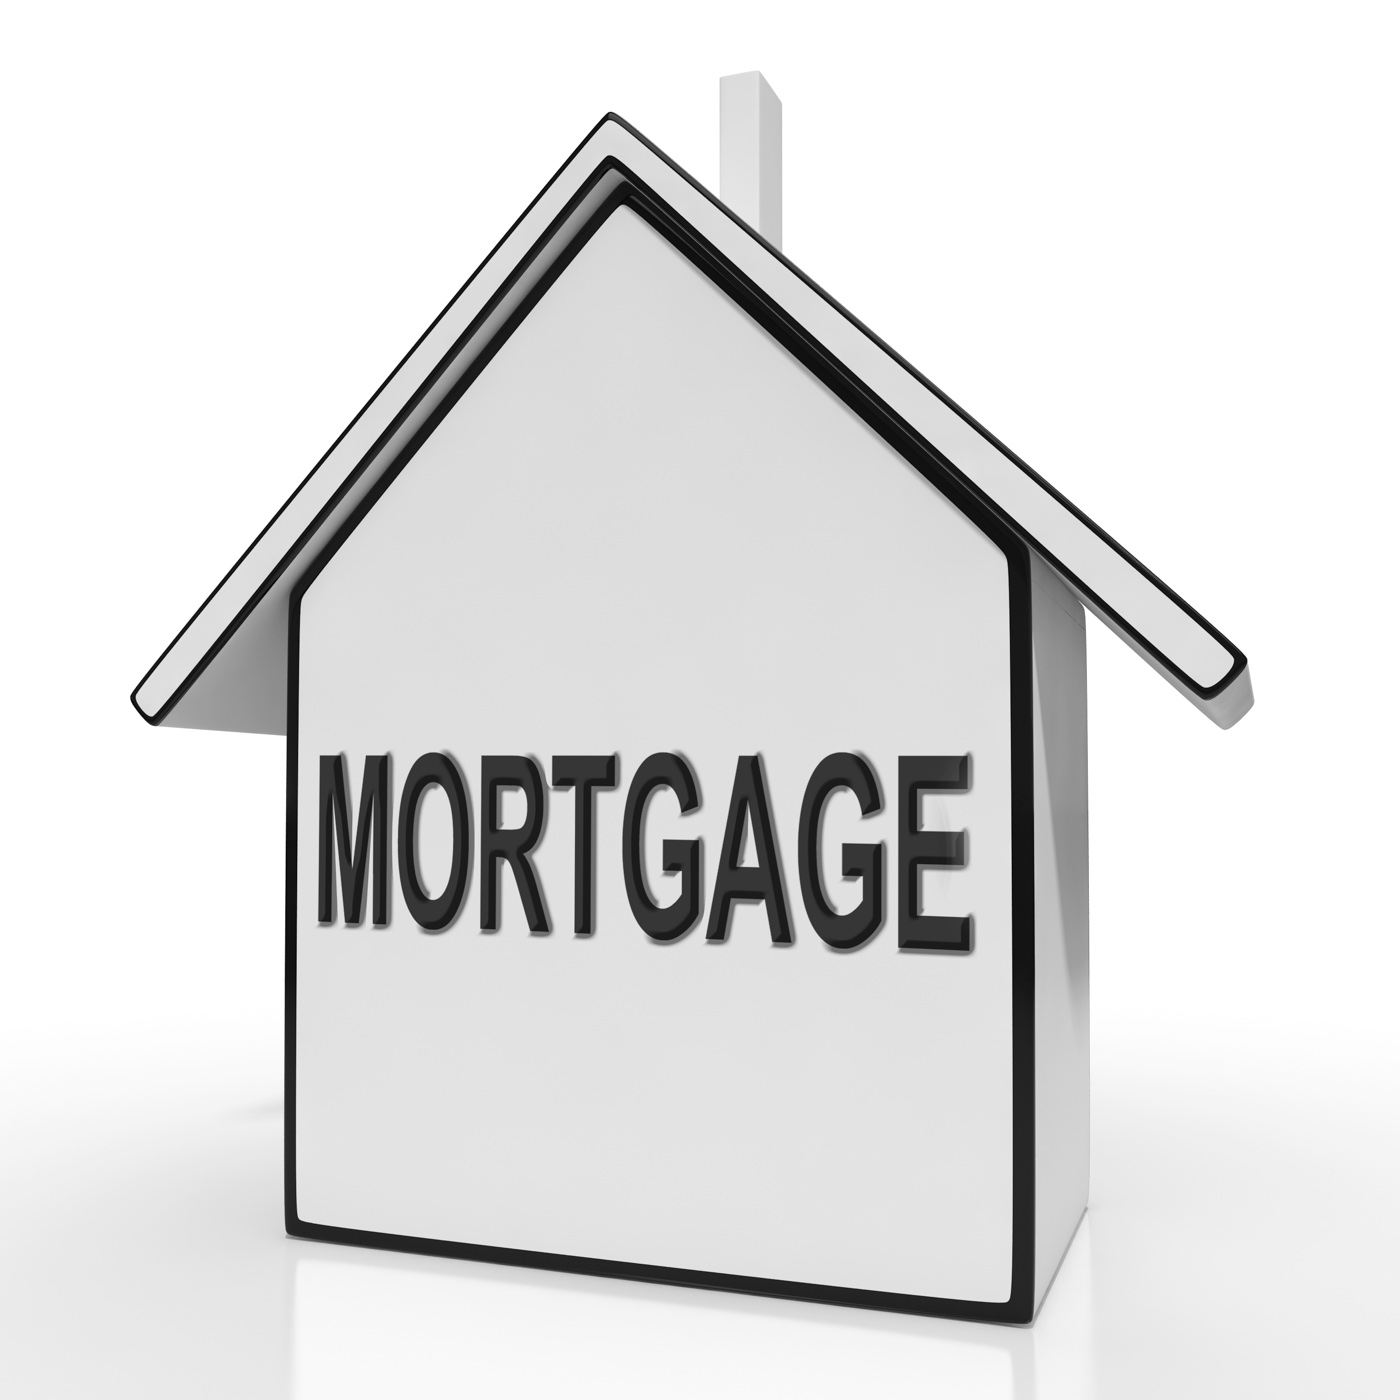 Mortgage house shows property loans and repayments photo